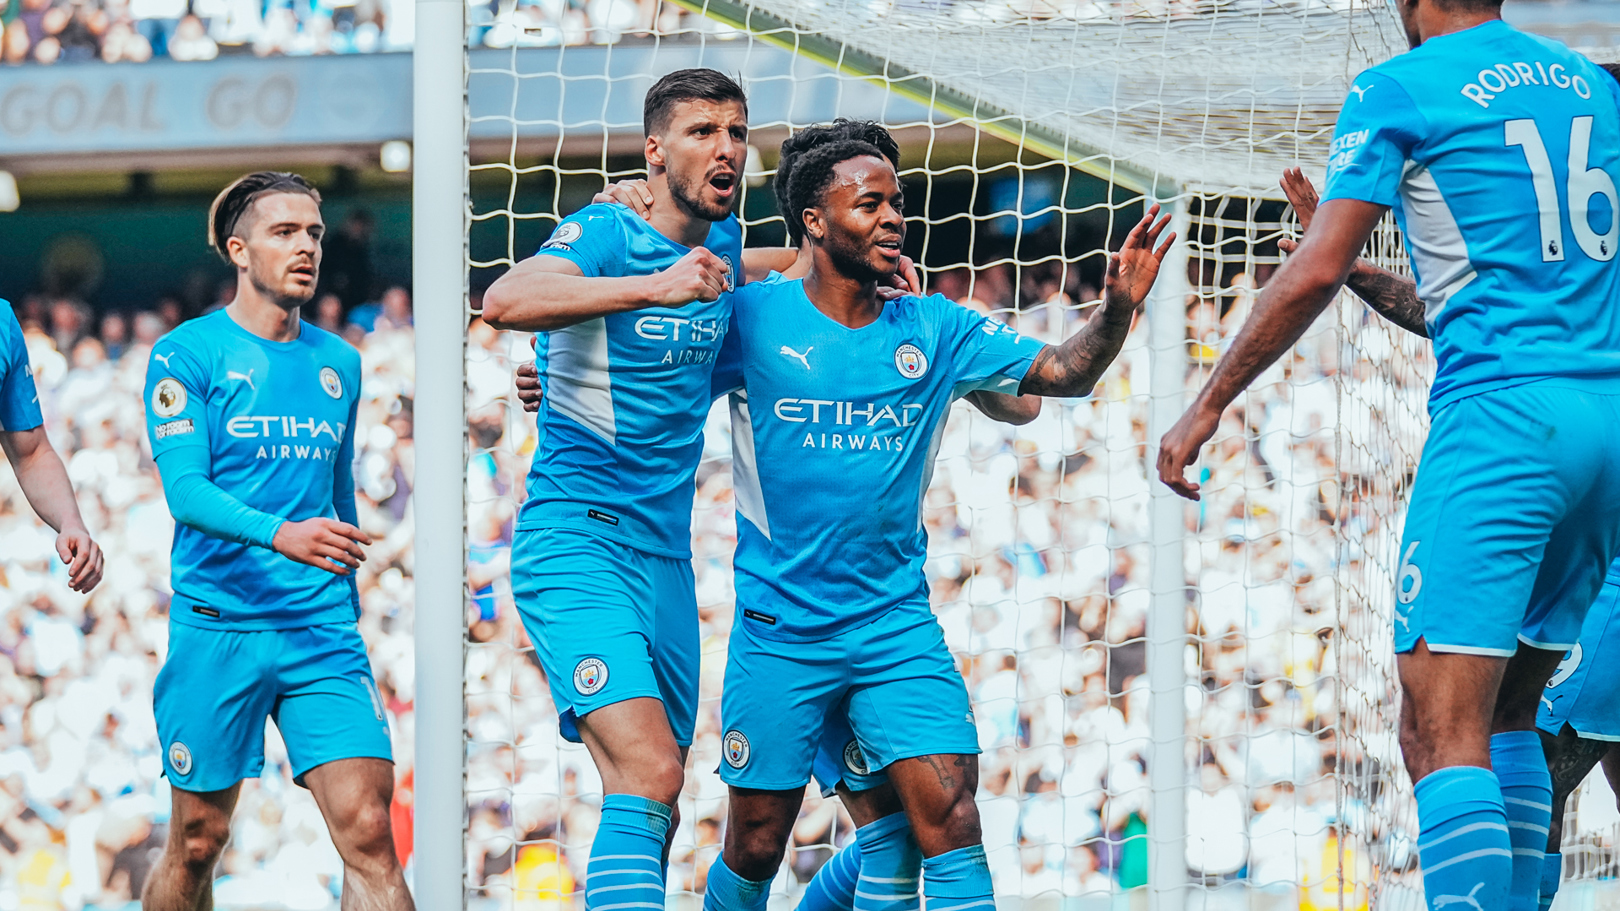 STERLING JOB: Raheem is congratulated by his teammates after his 19th minute goal.